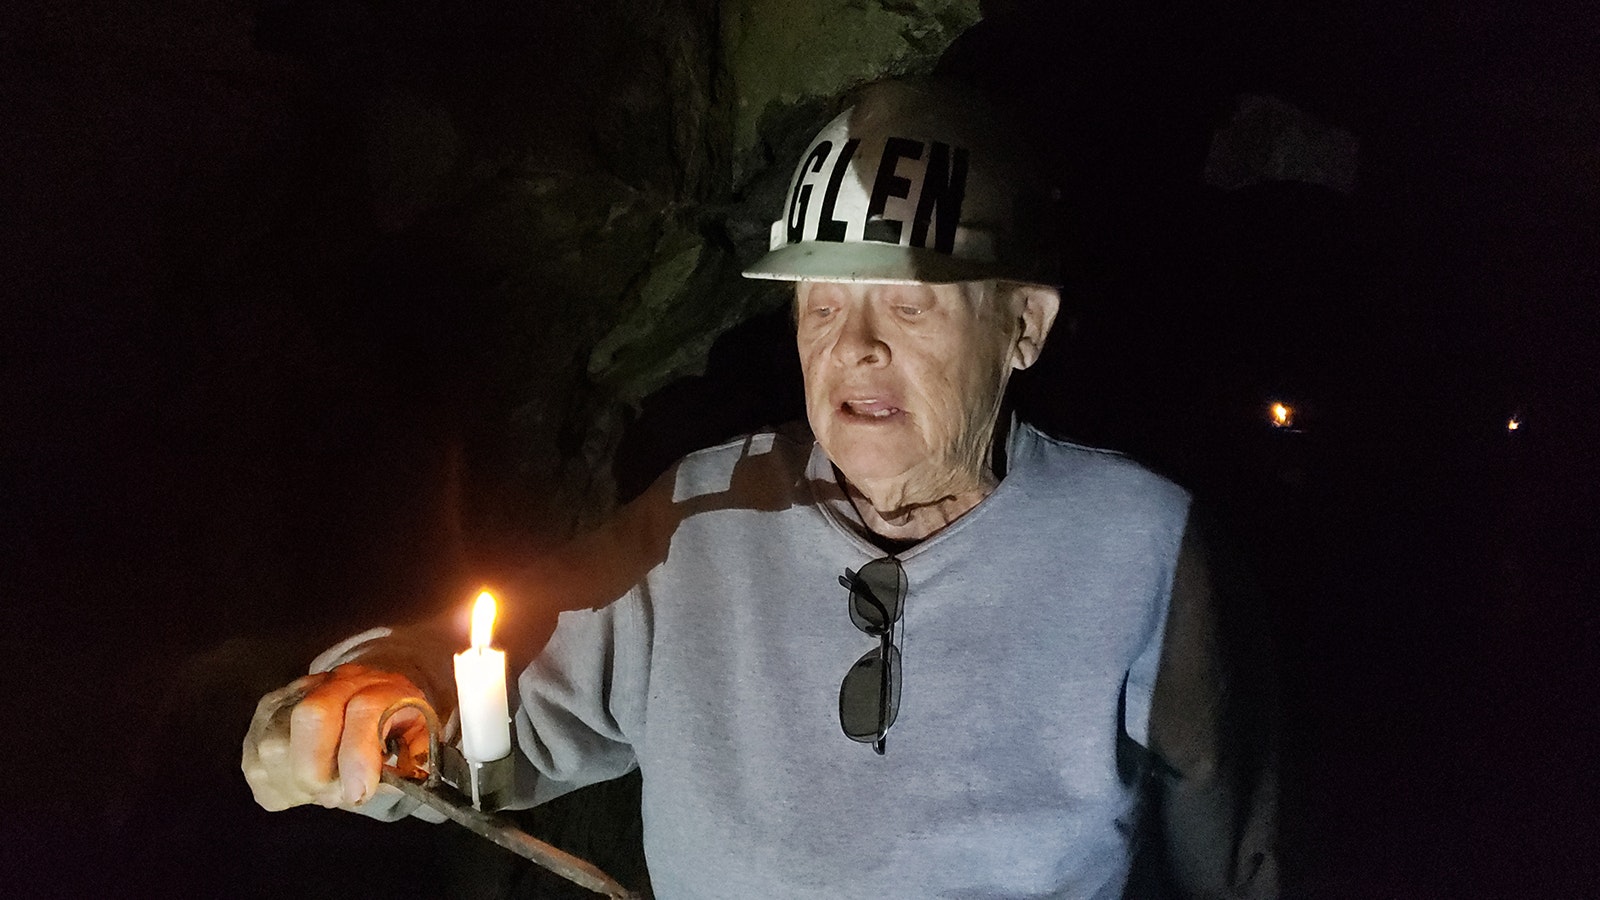 Miners were given just one candle per day for their work in the tunnel. This probably meant the miners shared a candle to help extend the life of the light by which they would have worked.